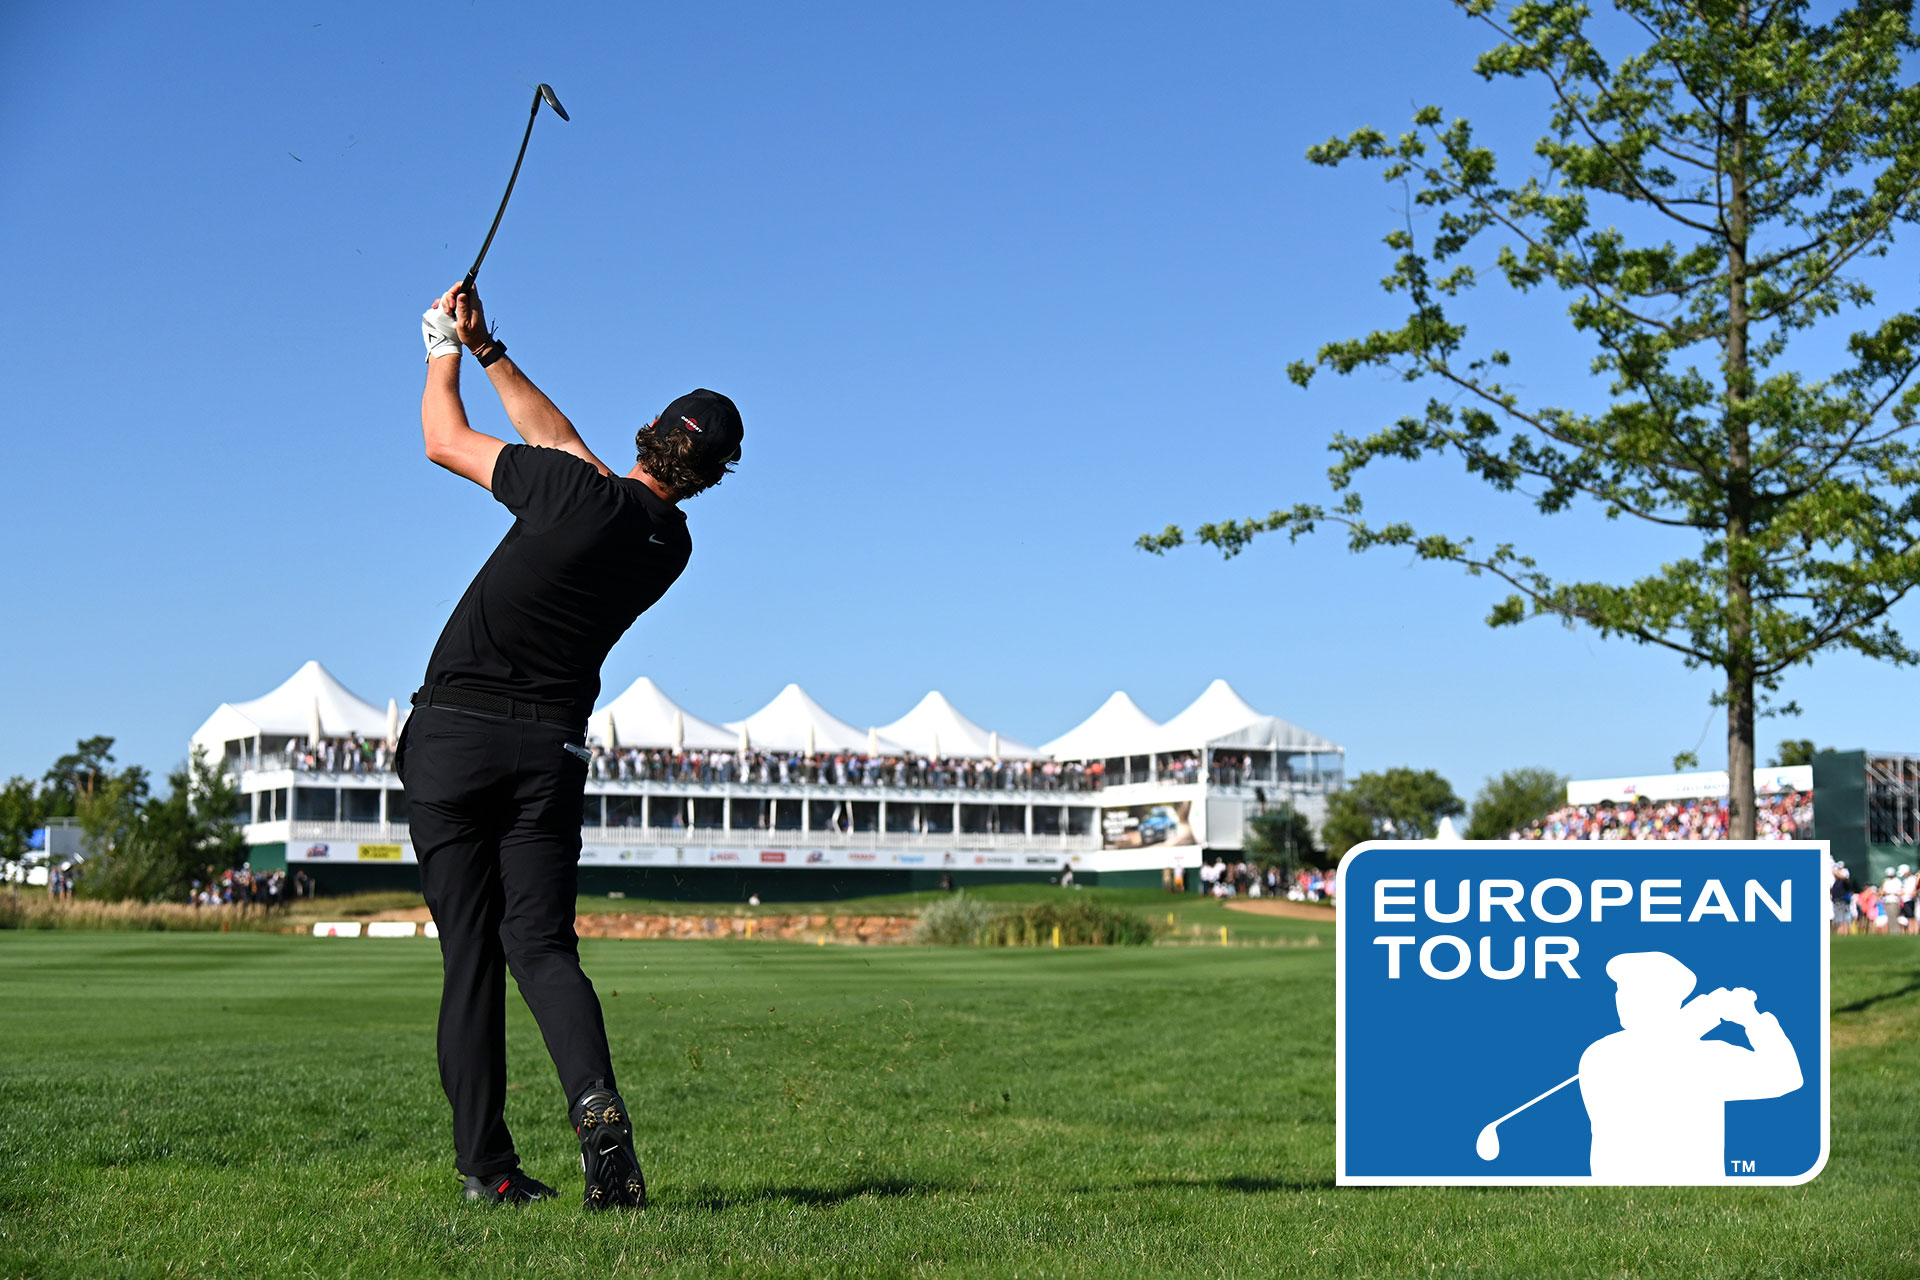 European Tour: Richard Bland is at T5 at the 57º OPEN DE PORTUGAL @ MORGADO GOLF RESORT after the first round